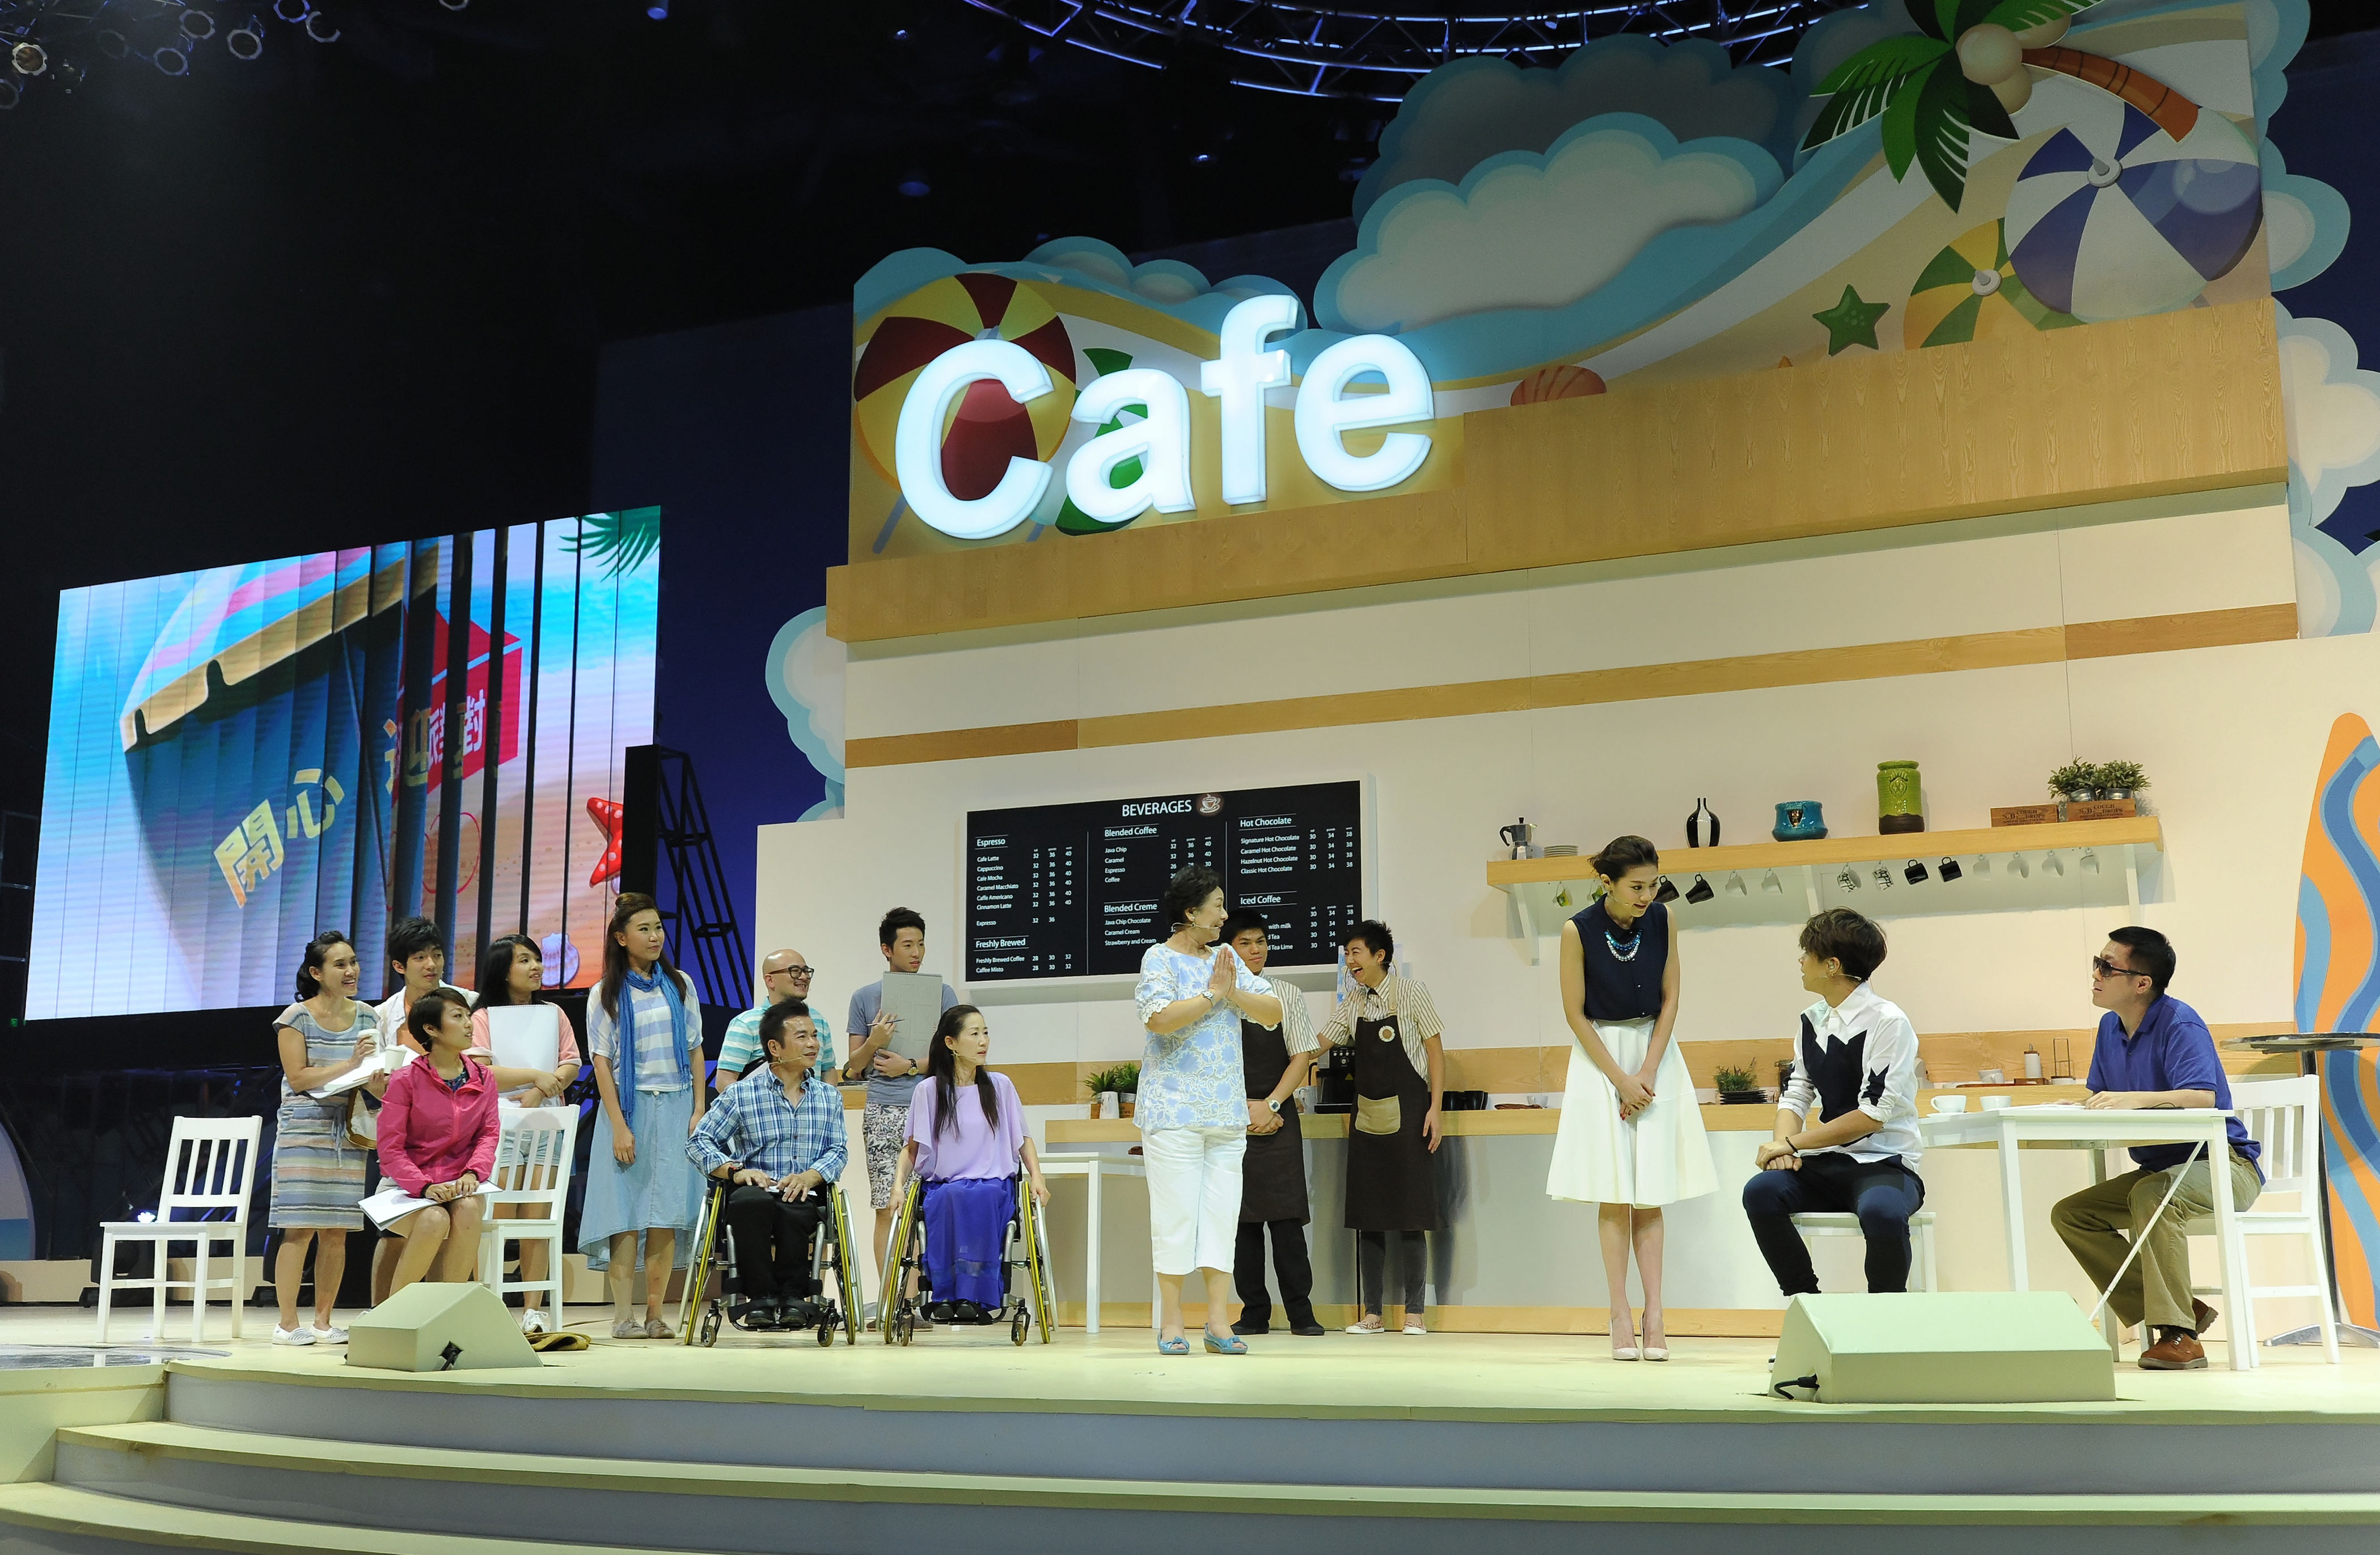 In line with the theme of “Talent-wise Employment”, persons with disabilities were invited to take part in the production of the variety show in order to demonstrate their talents in different aspects.